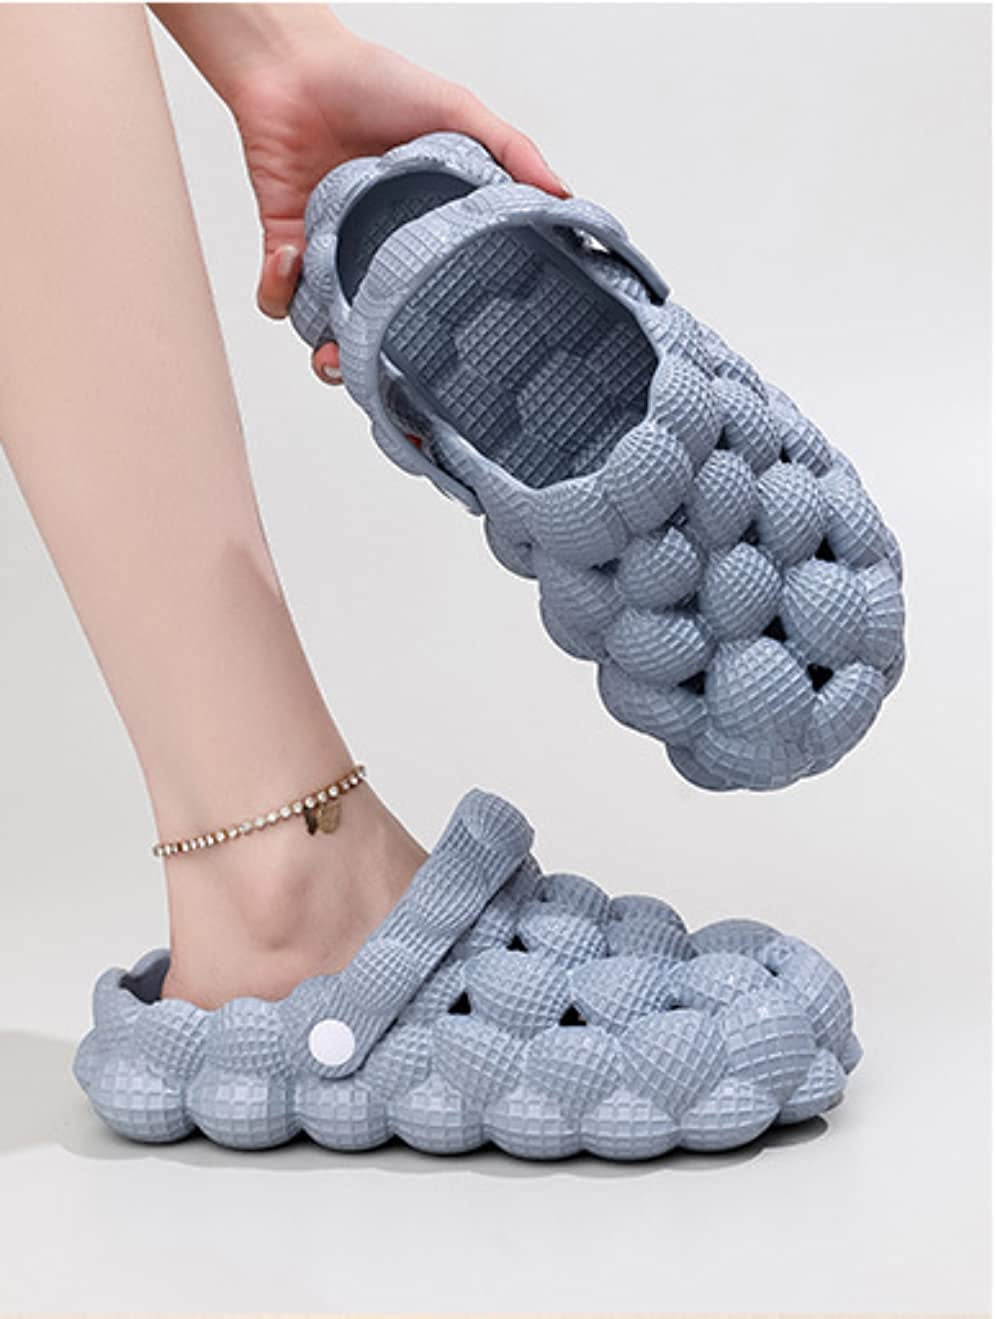 Non Slip Bubble Bubble Sandals For Men And Women Perfect For Summer Beach,  Home, And Bathroom From Ulikebags, $15.5 | DHgate.Com